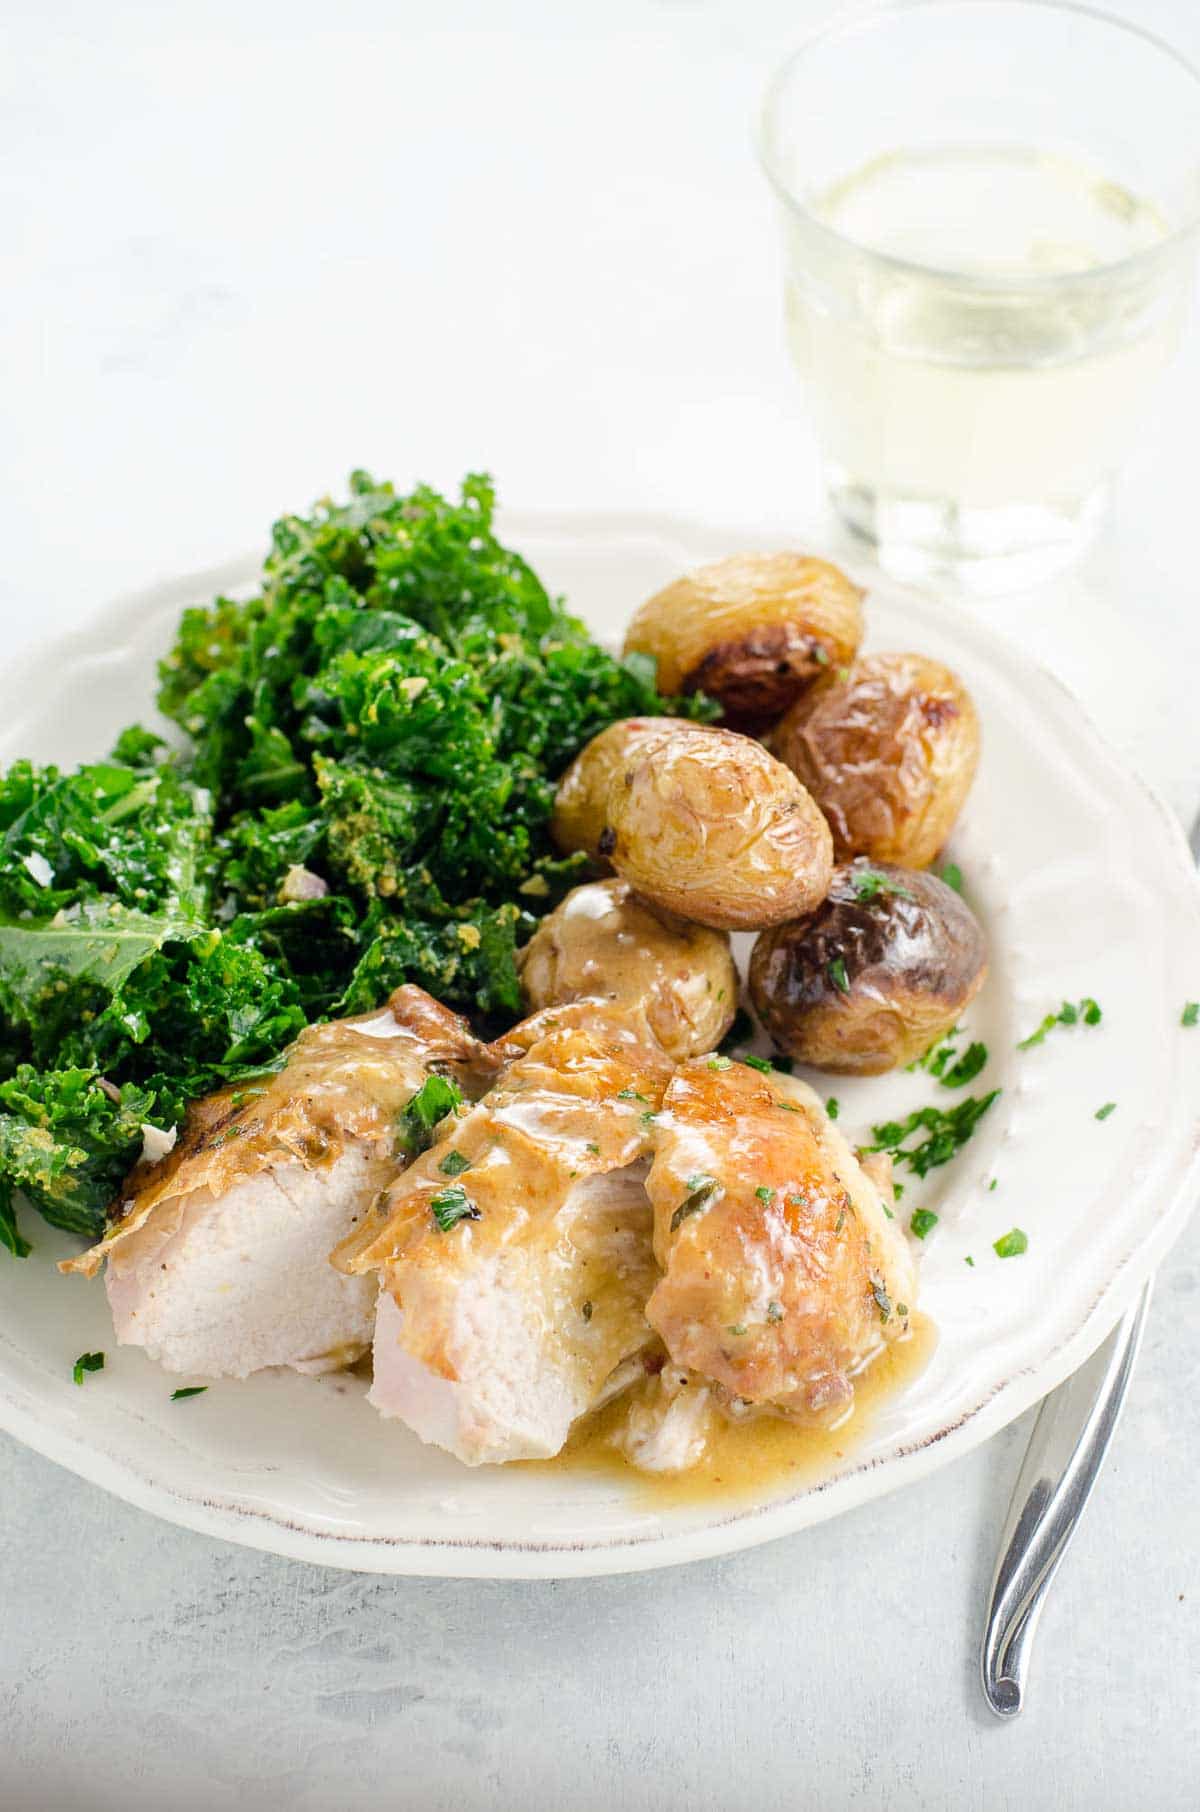 roast chicken and potatoes with kale salad on a plate